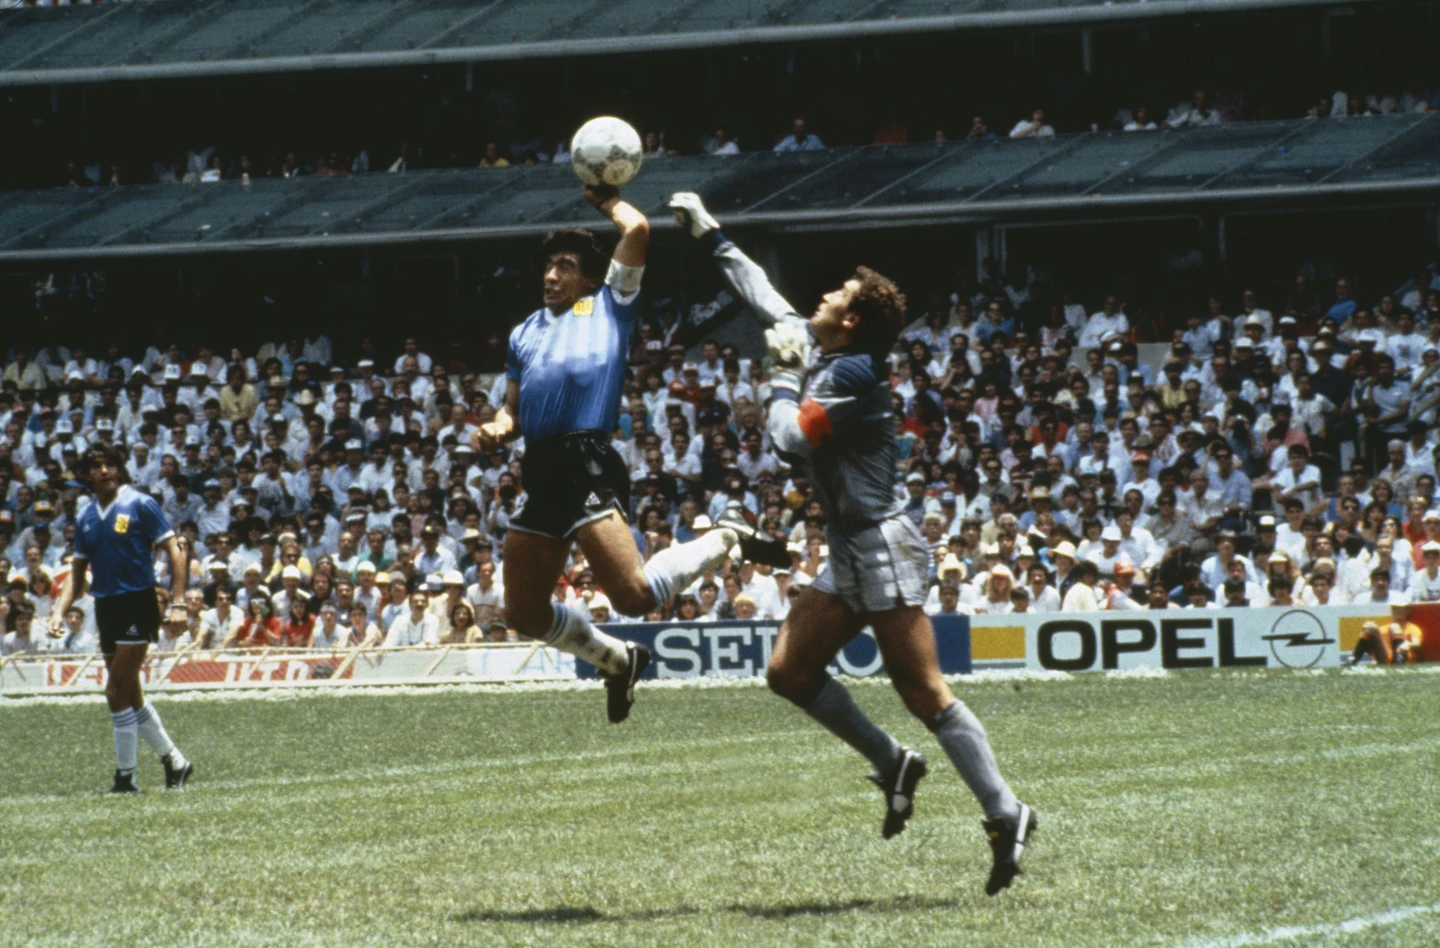 This is the story of Maradona’s shirt that will now be auctioned